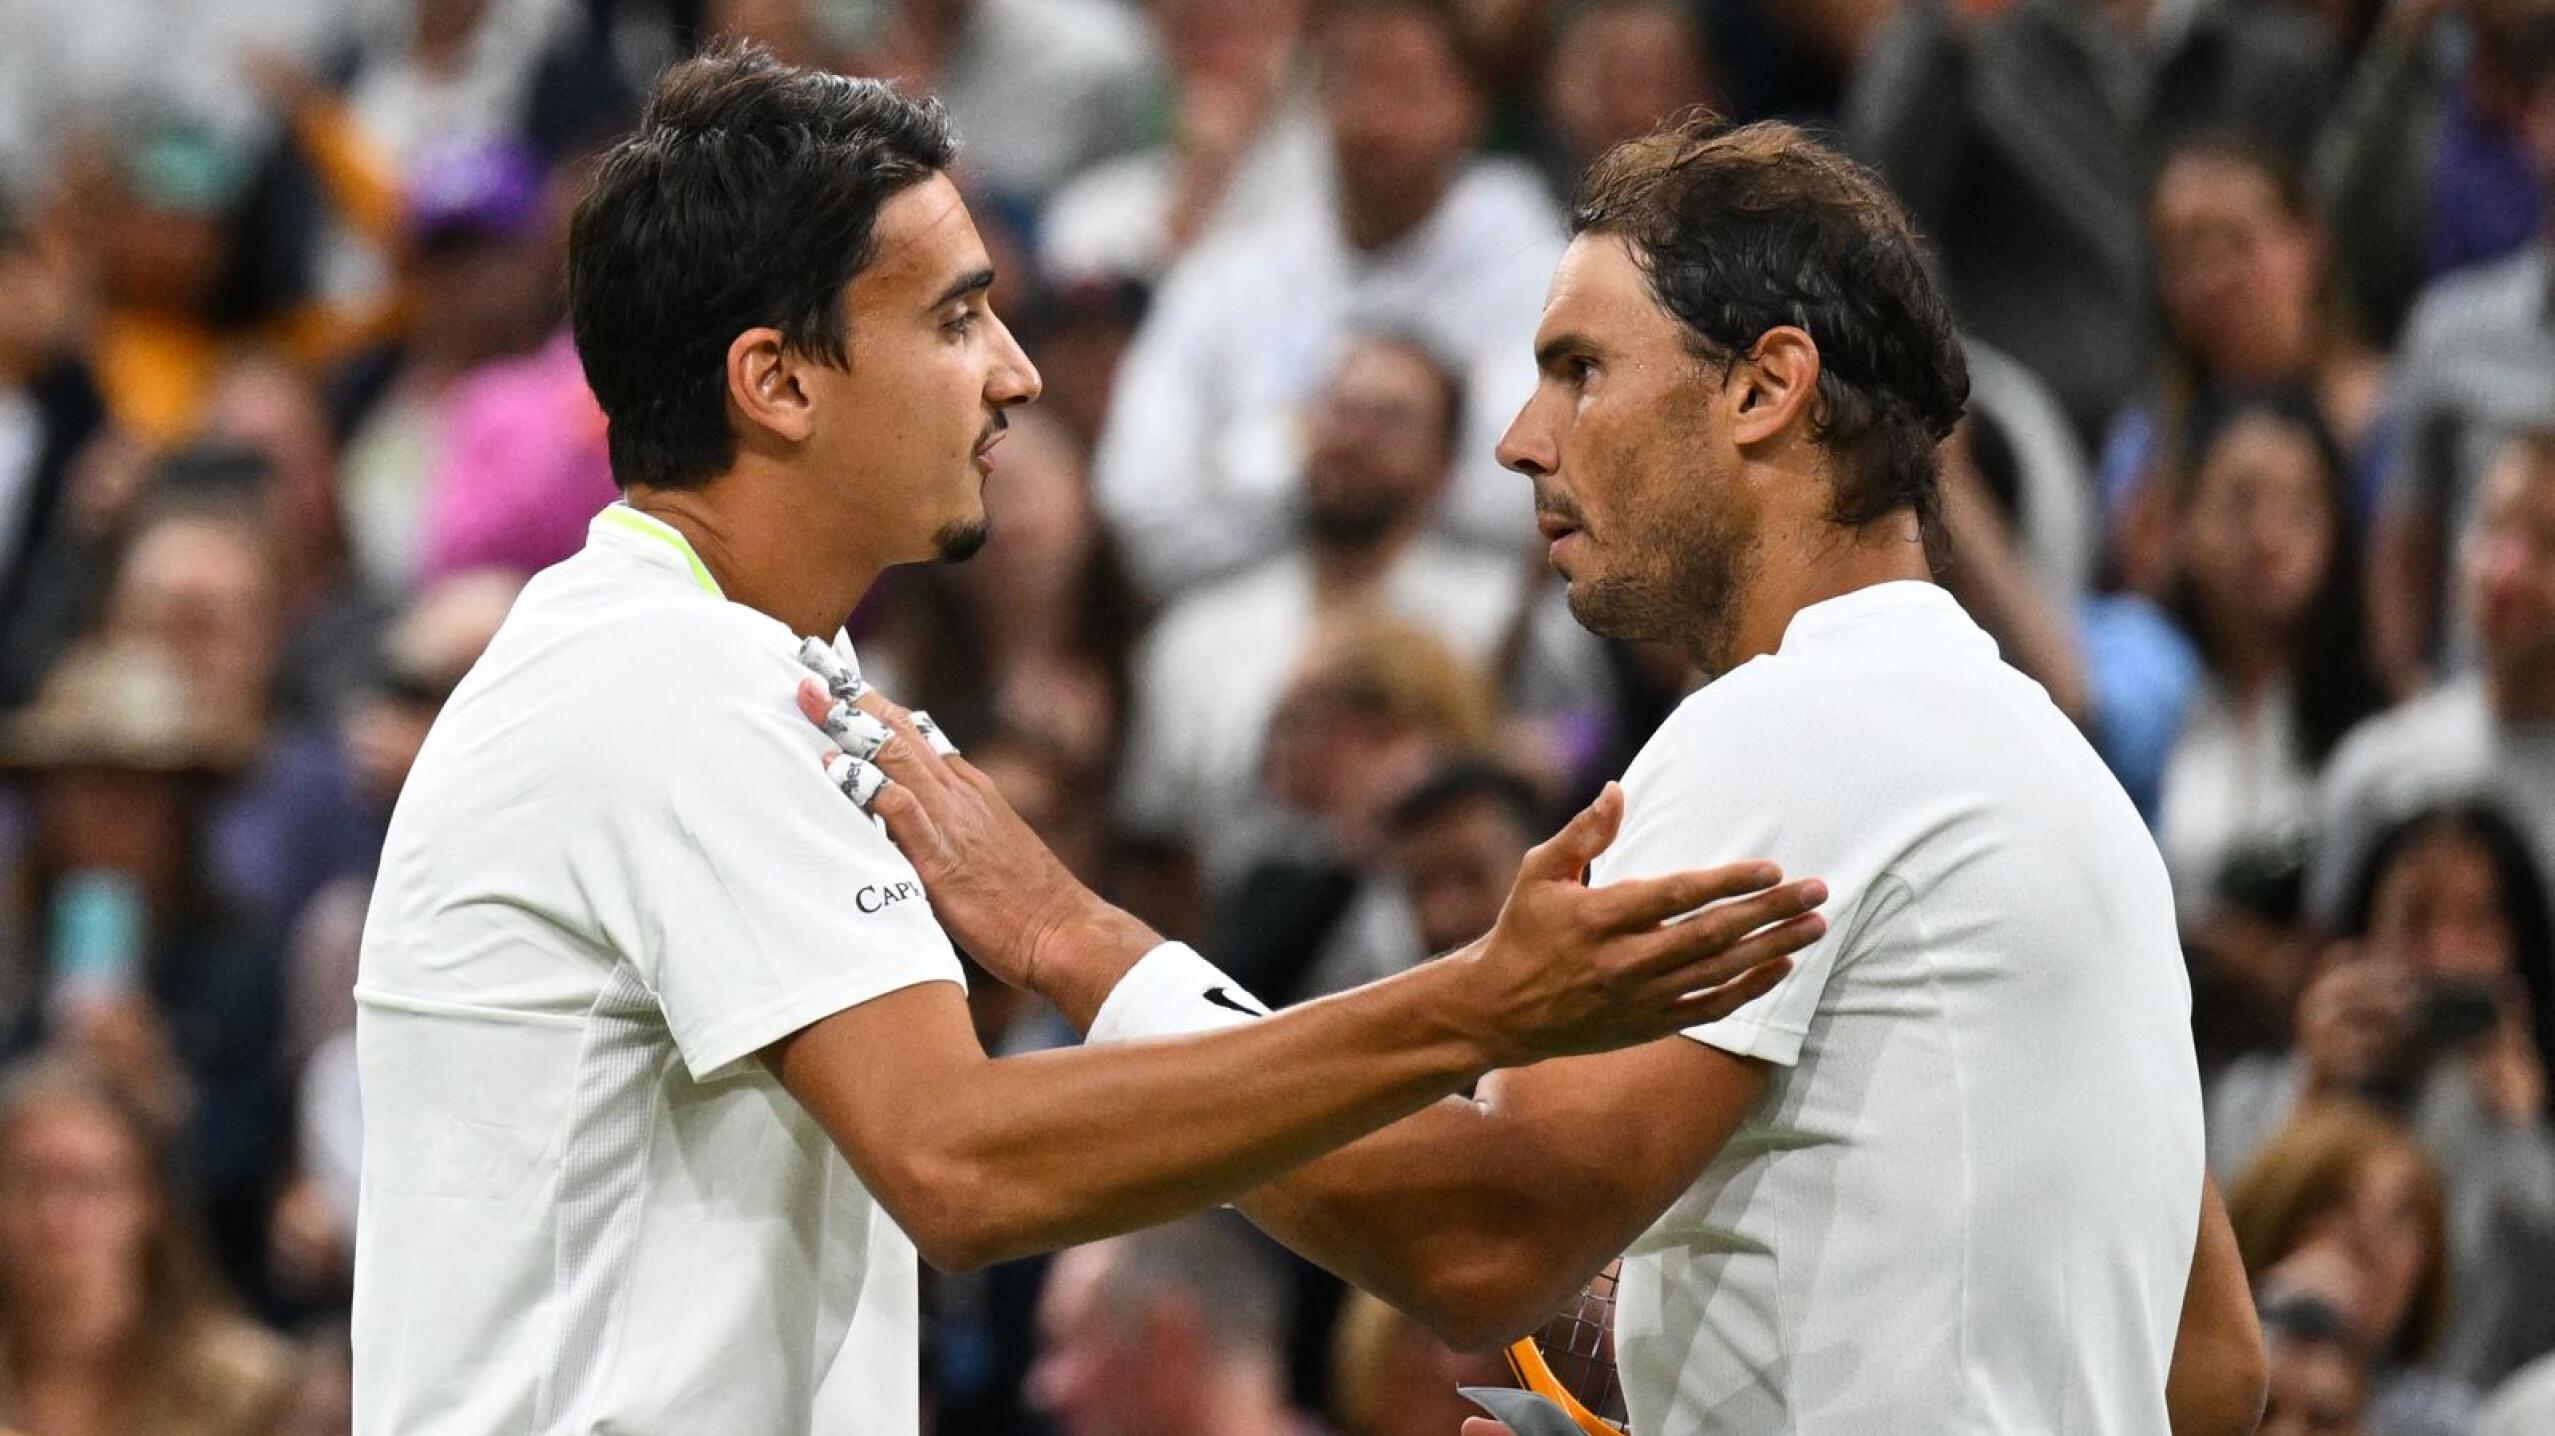 Spain's Rafael Nadal speaks with Italy's Lorenzo Sonego after winning in their men's singles tennis match on the sixth day of the 2022 Wimbledon Championships at The All England Tennis Club in Wimbledon, southwest London, on Saturday